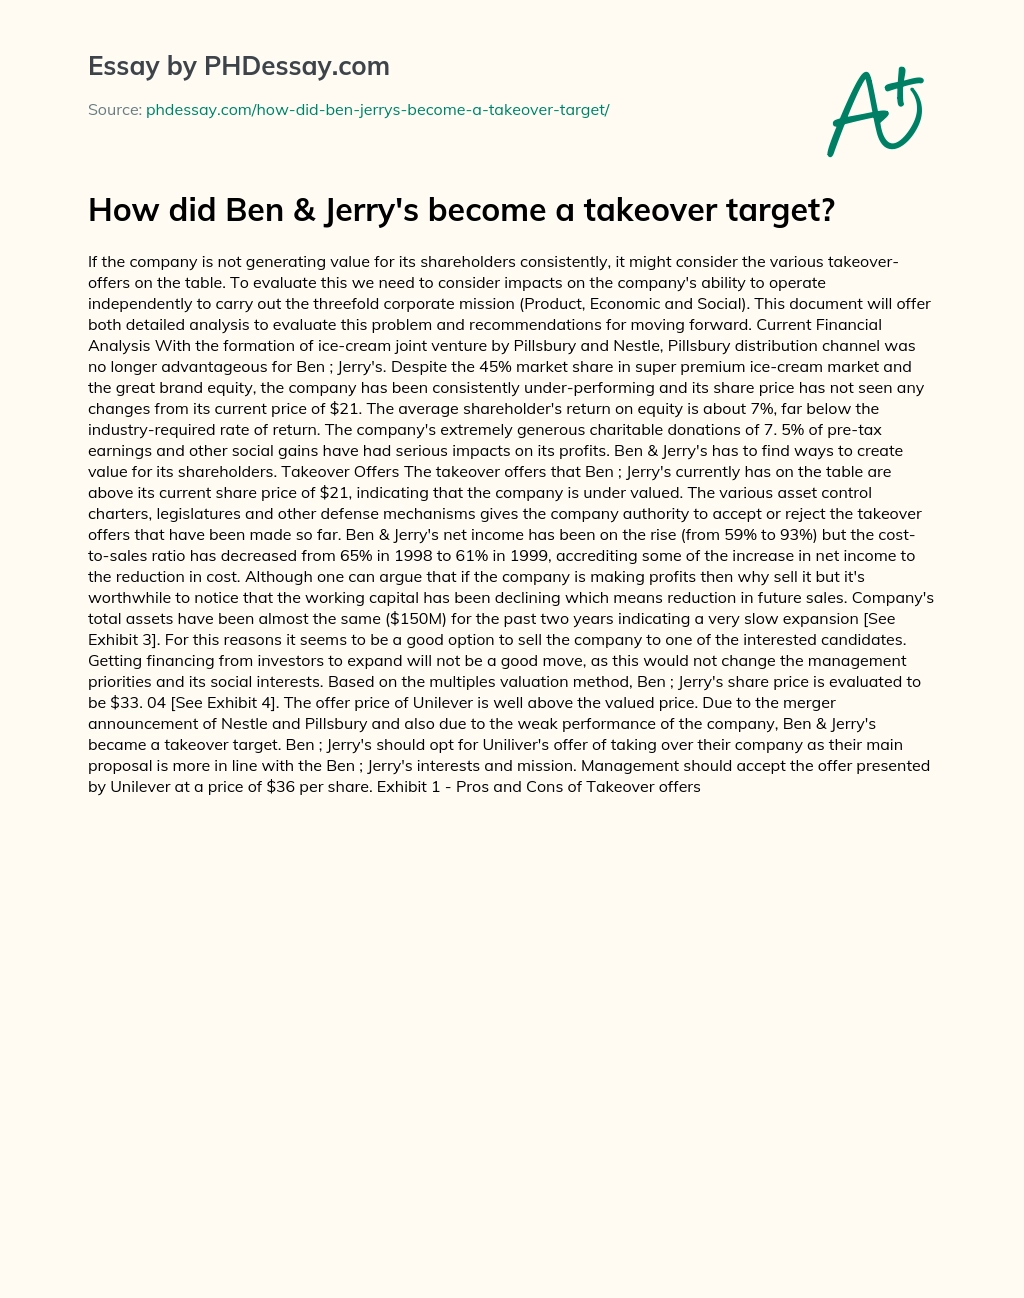 How did Ben & Jerry’s become a takeover target? essay